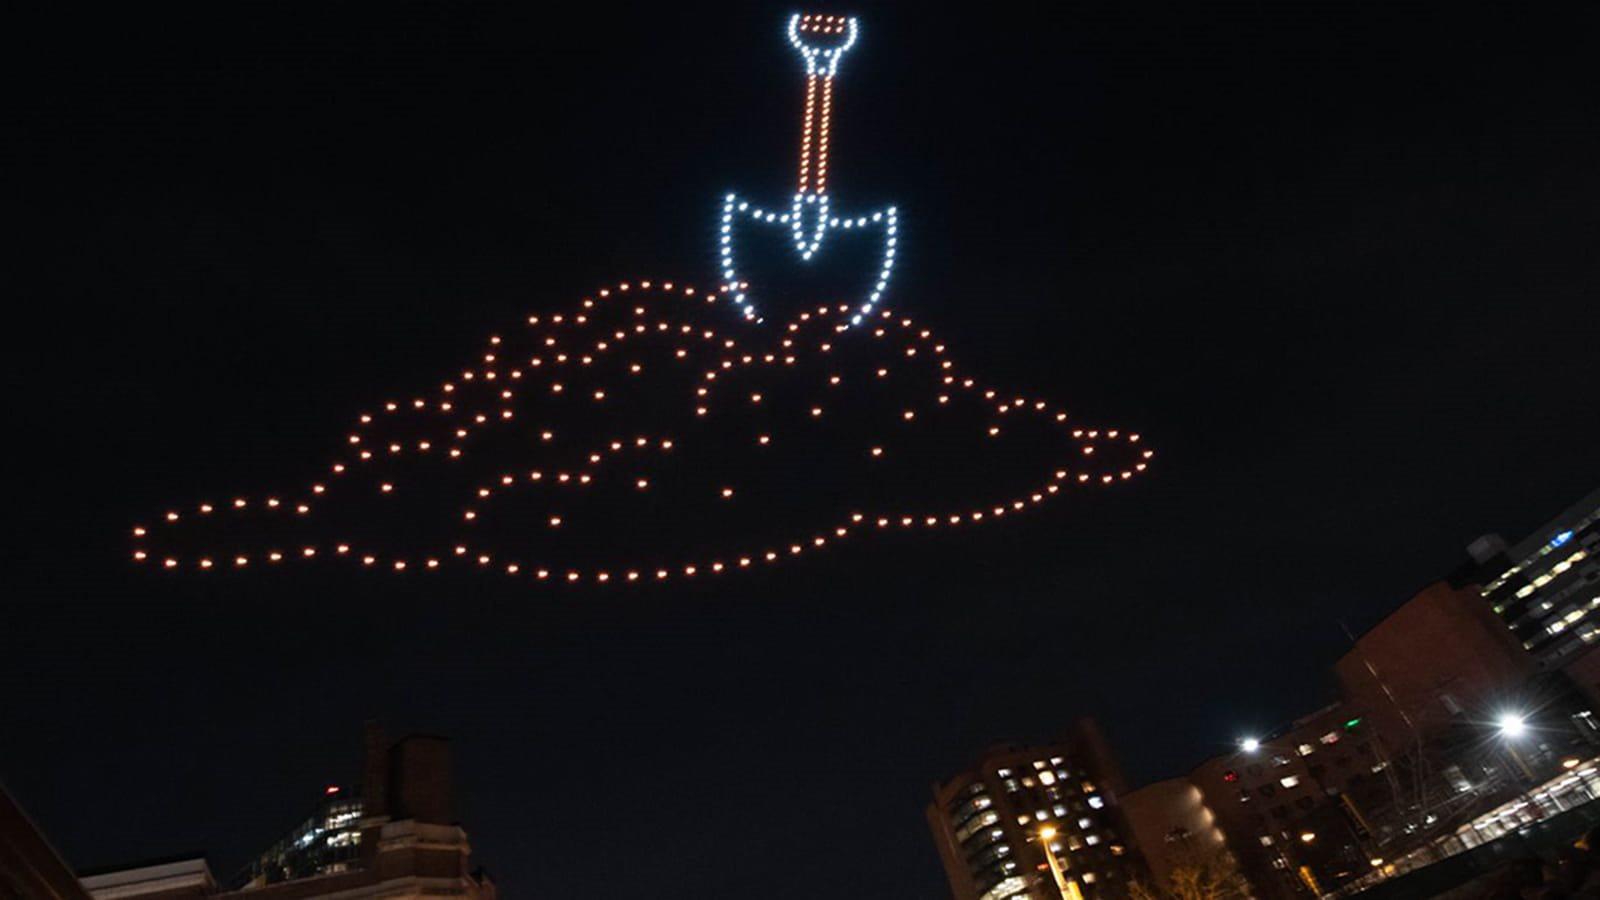 Photo of shovel with drones in night sky